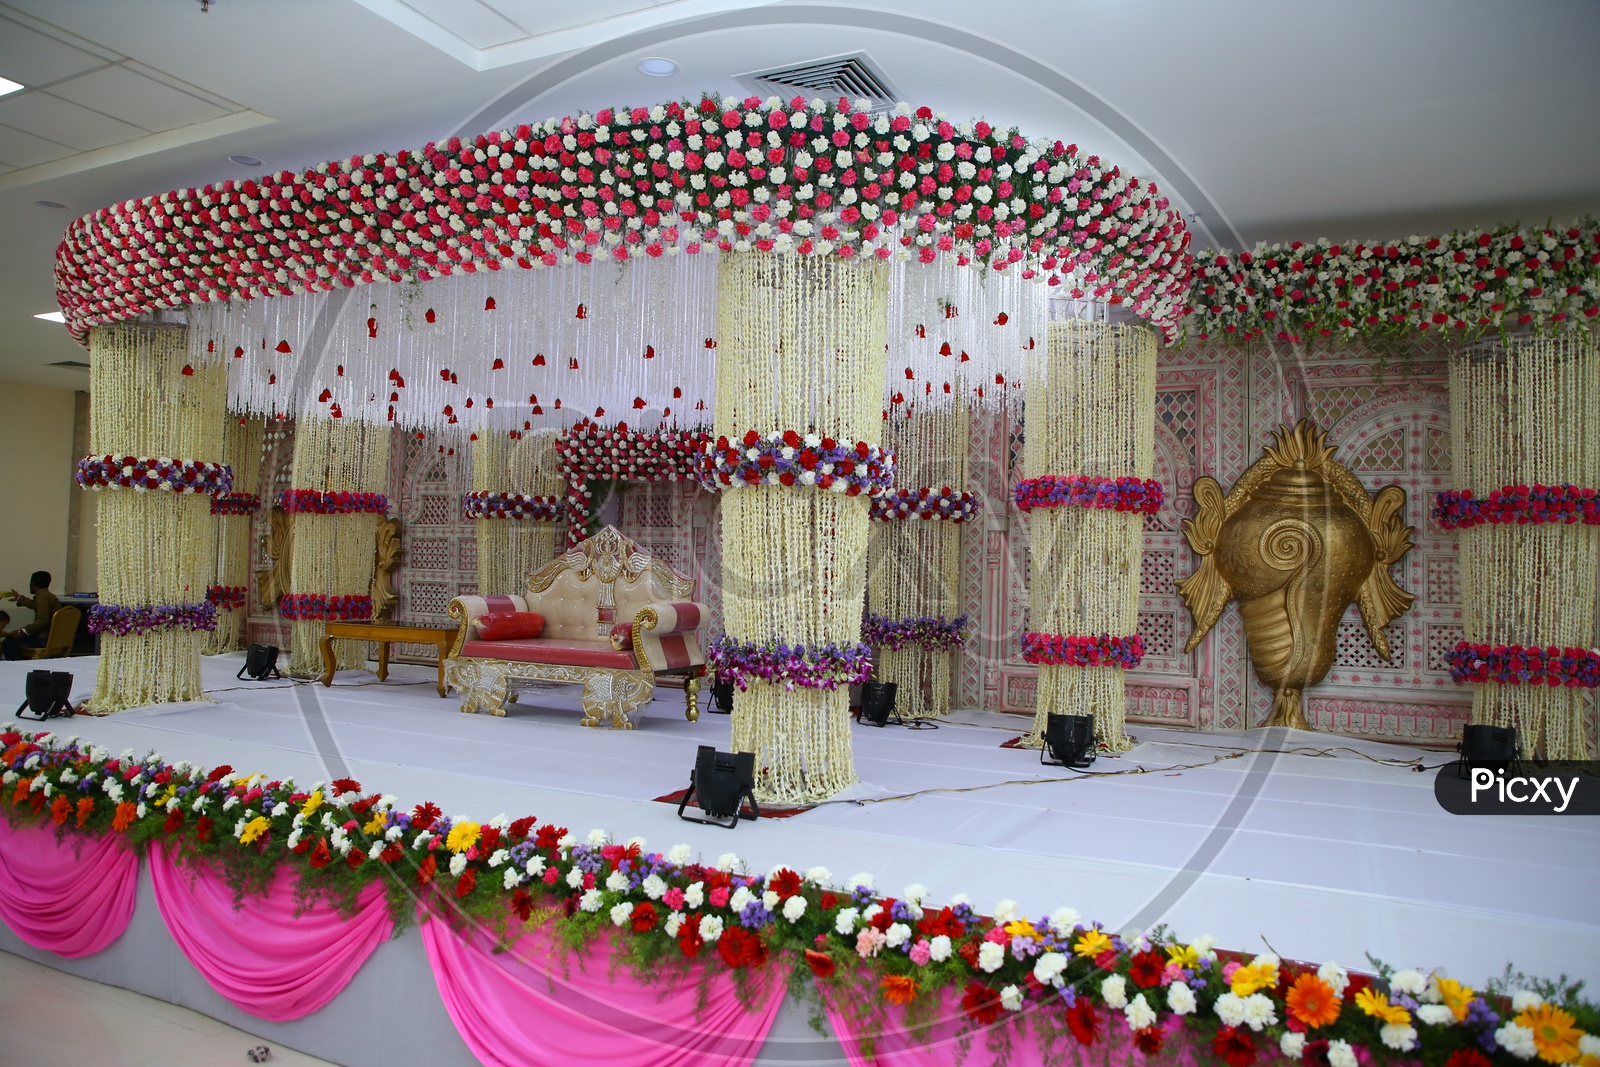 Stage Decorated  With Fresh  Flowers And Sofa Arranged For Couple  In a Wedding Reception